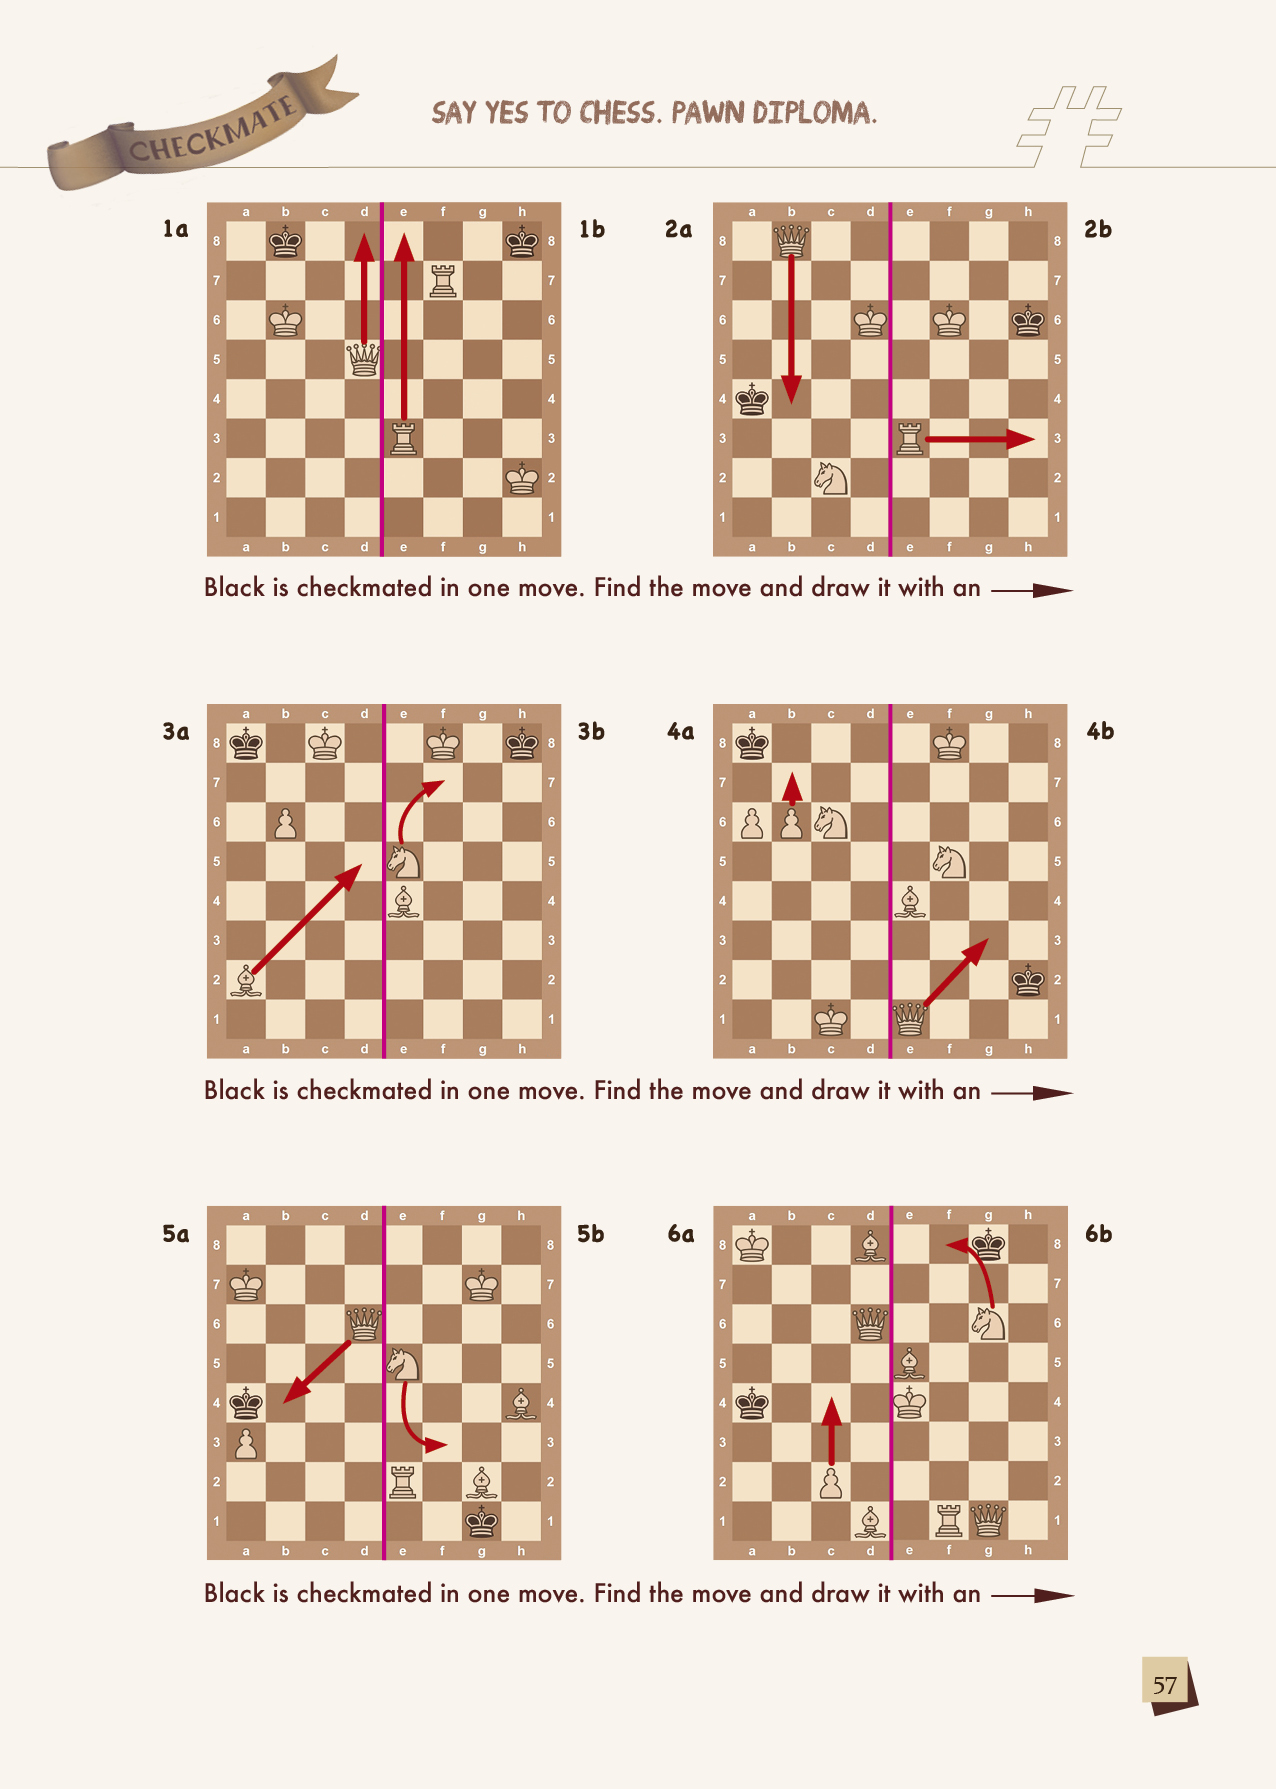 sayyes2chess_solutions_page_57.jpg